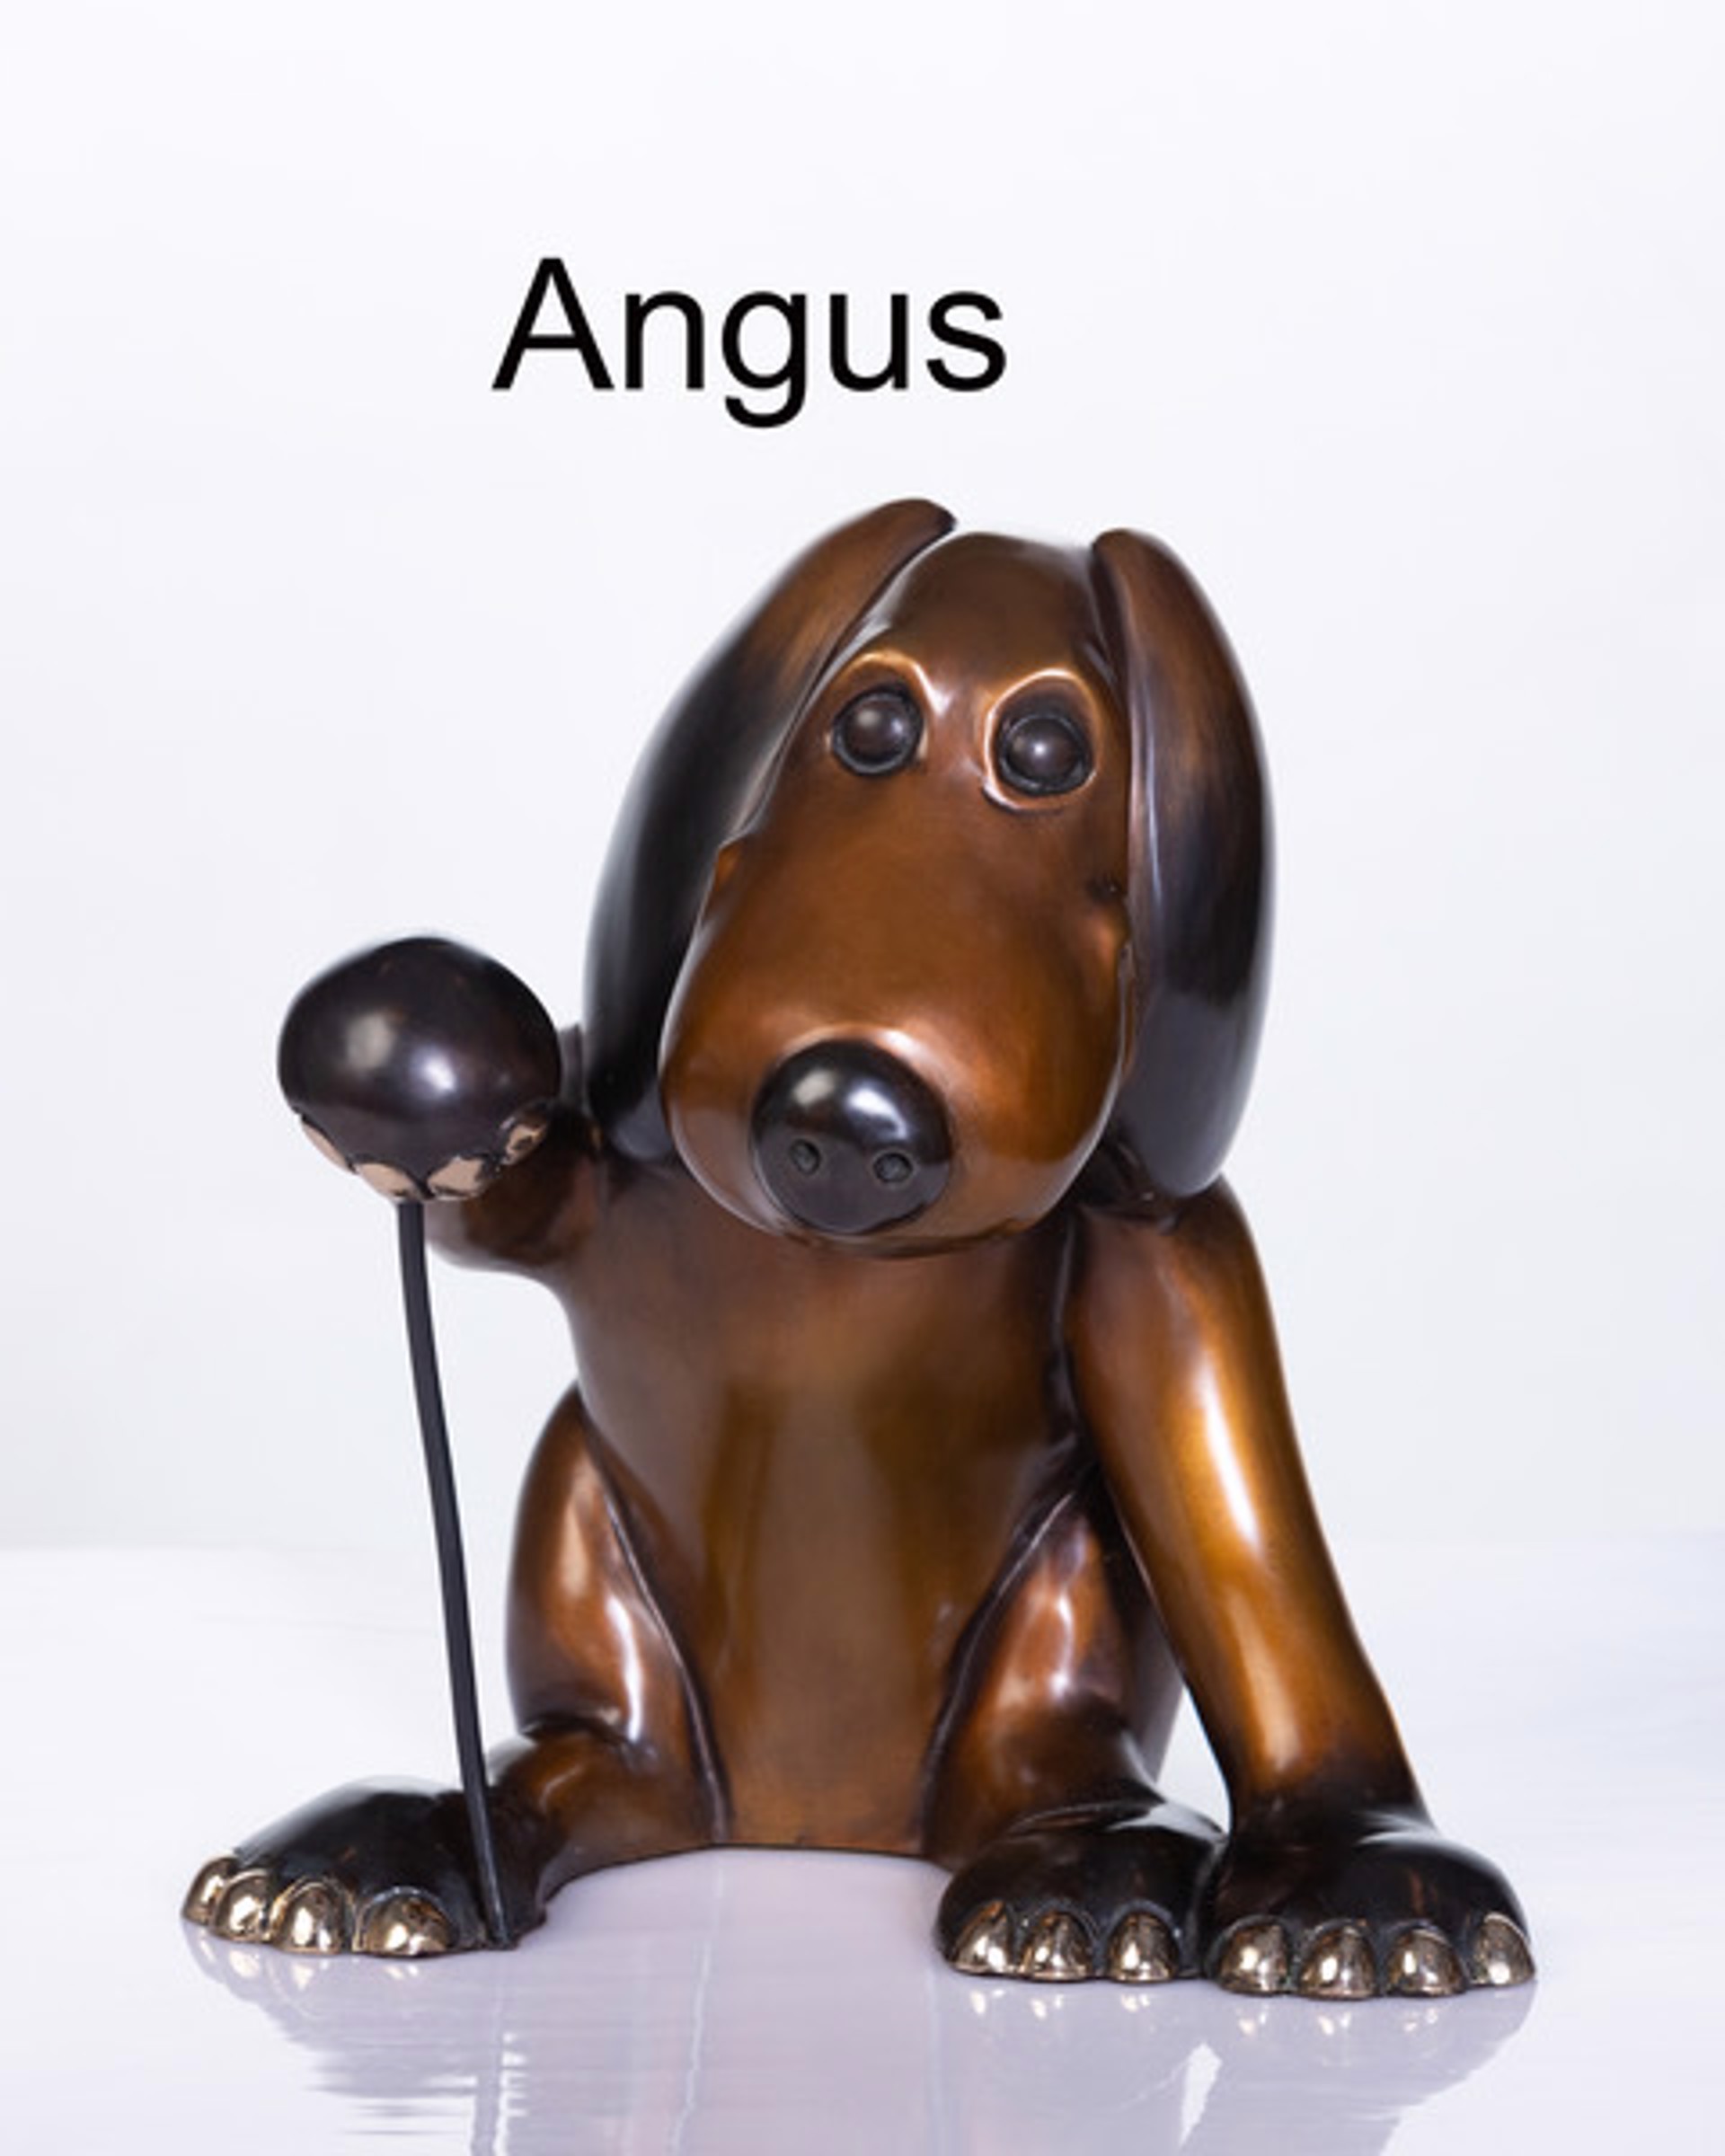 Angus by Marty Goldstein